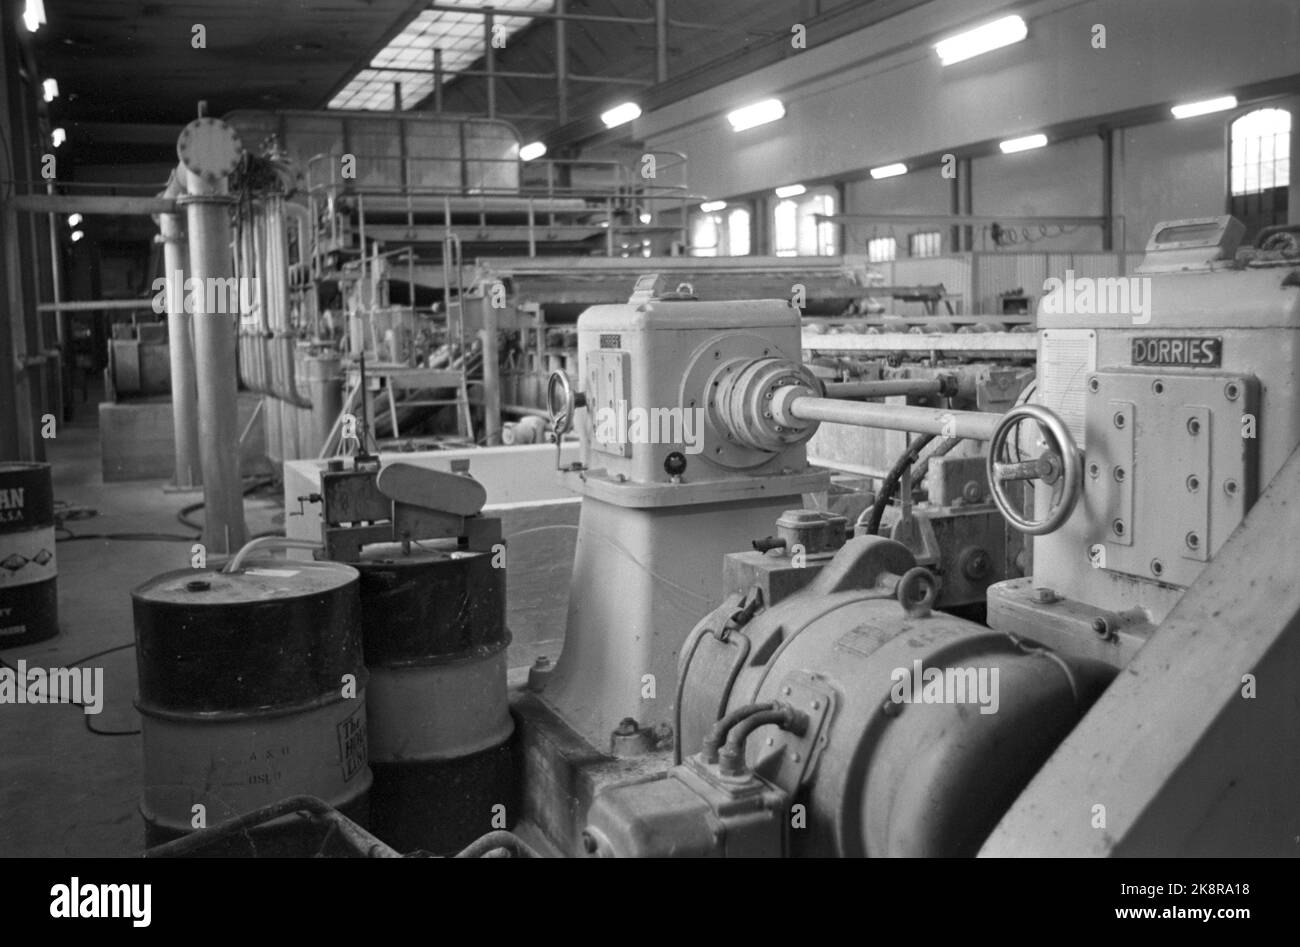 Vestfossen 19701212 The wheels are on Vestfossen. The layoffs at Vestfos Cellulose Factory came as a shock to the employees, as did the bankruptcy. Poor treatment of the employees. Environmental images from the last working days before the company closed its doors. The machines are standing. Photo; Sverre A. Børretzen / Current / NTB Stock Photo